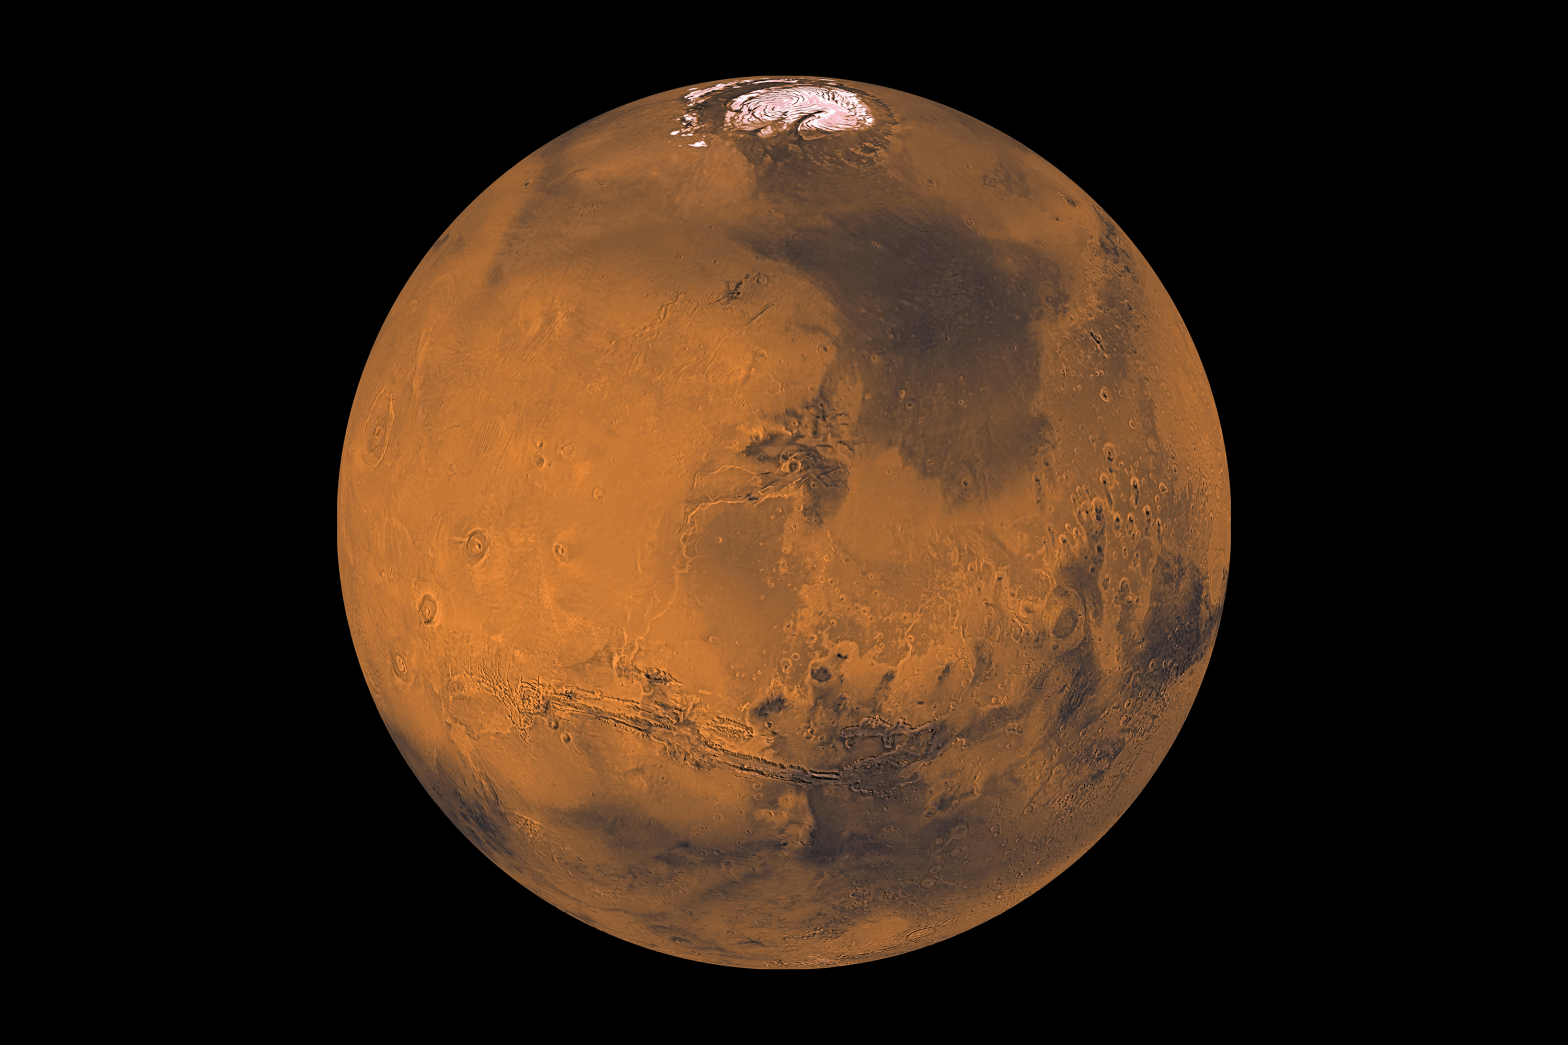 The sandy red orb of Mars is shown against a black background. Numerous dark regions are scattered across its surface, and the bright, white northern polar ice cap is visible at the top of the image.